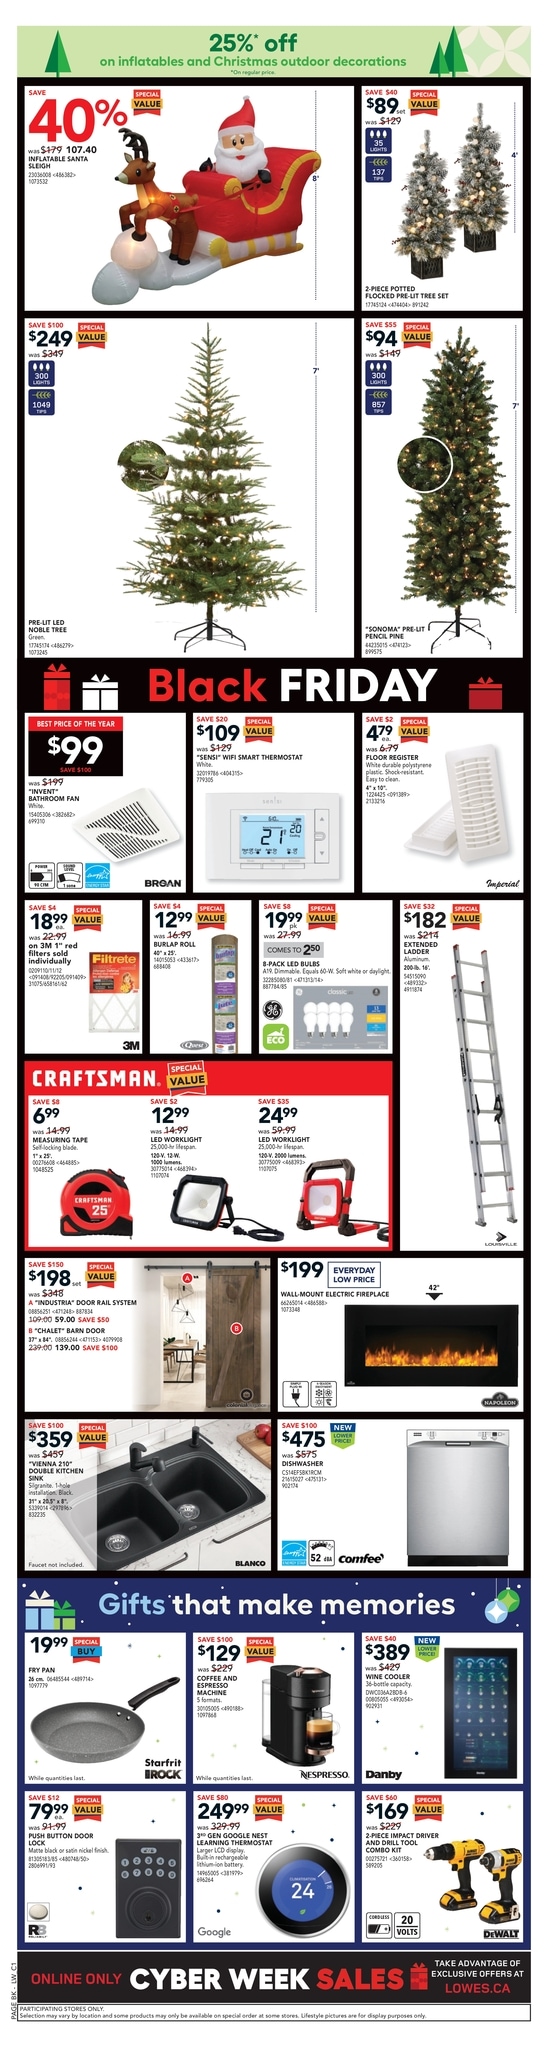 LOWE'S - Weekly Flyer Specials - Black Friday - Page 2